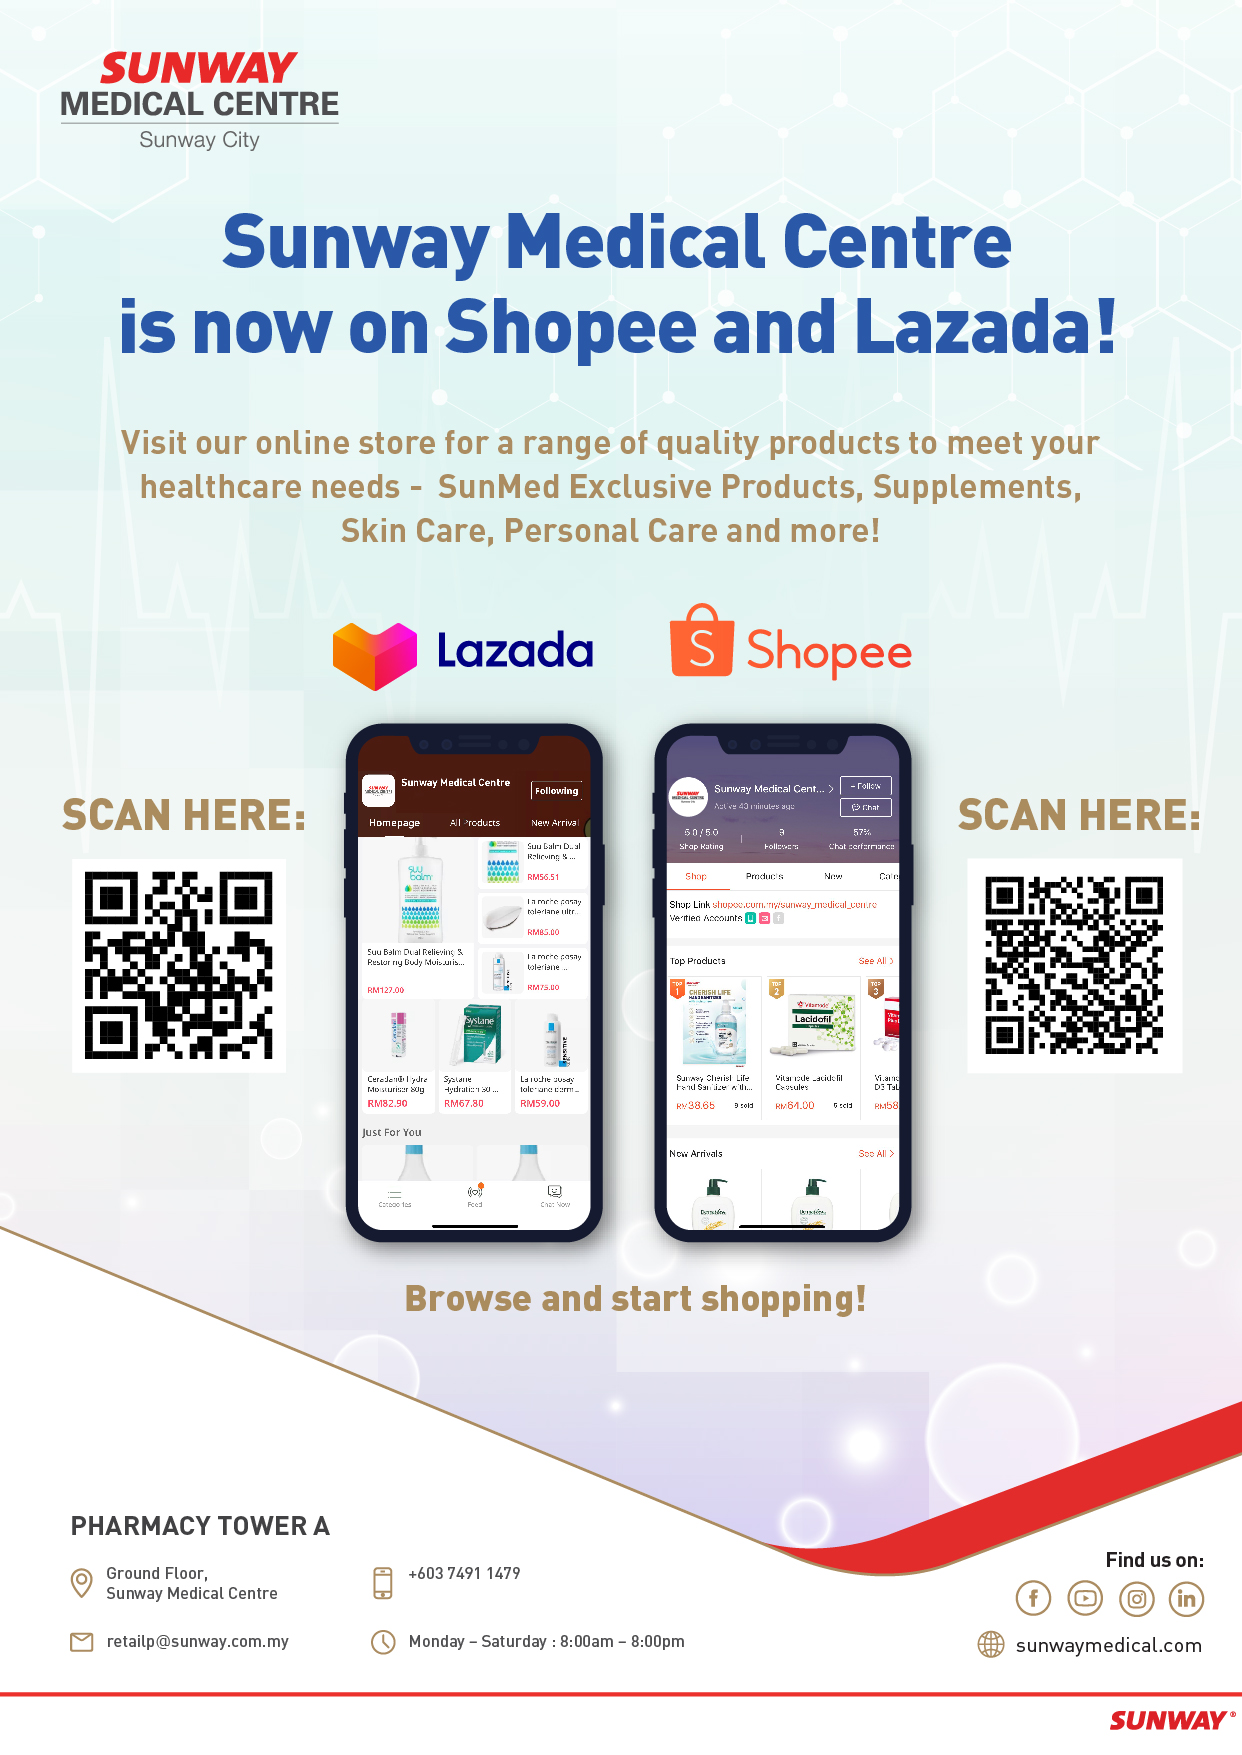 Sunway Medical Centre is now on Shopee and Lazada!